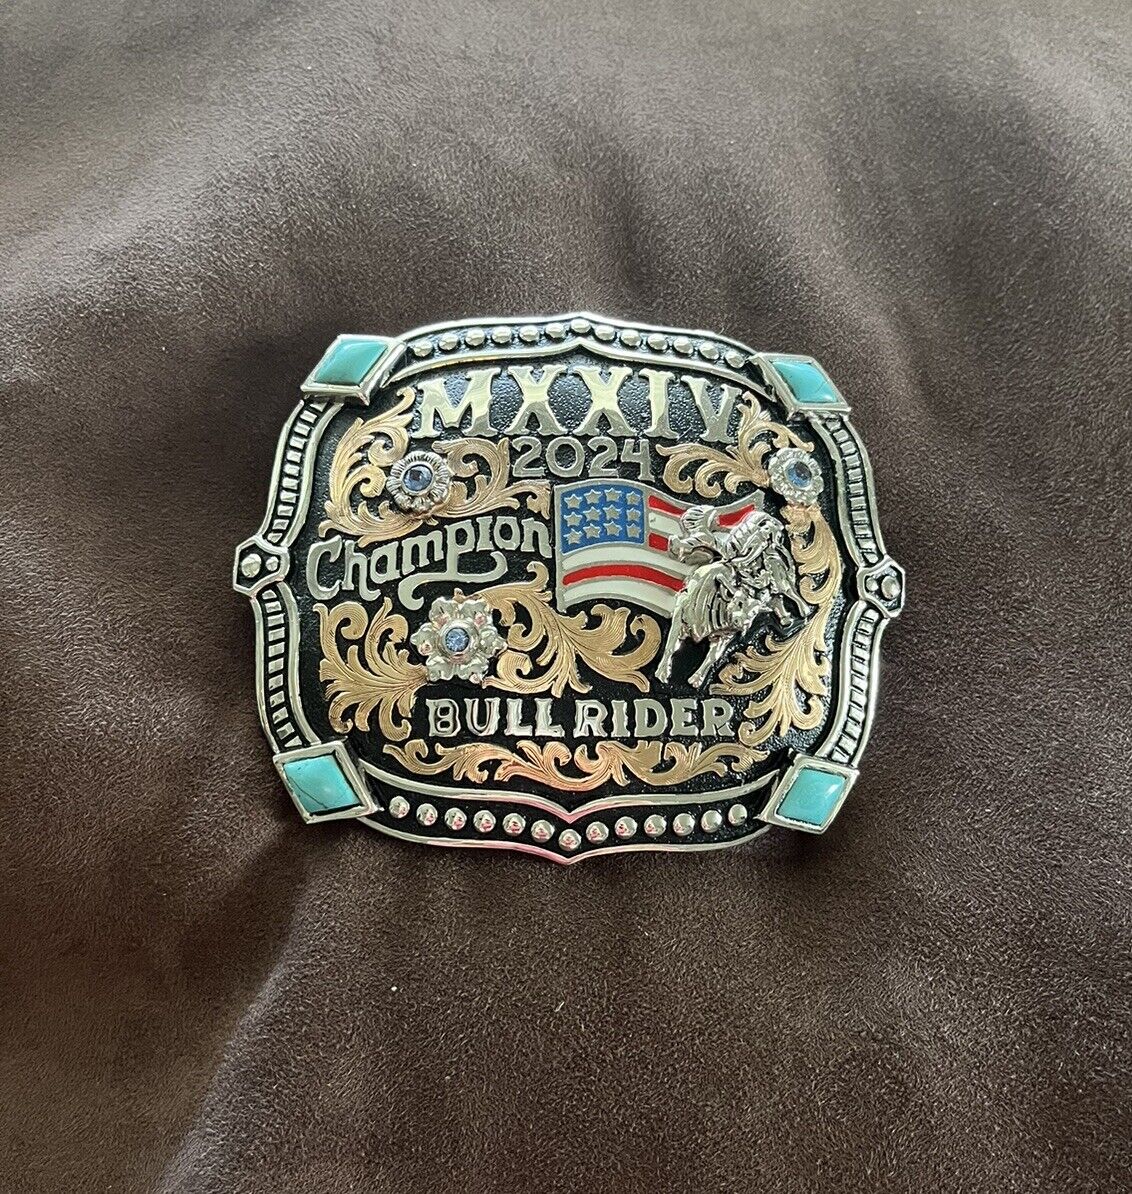 Trophy Rodeo Champion Belt Buckle Bull Rider Riding